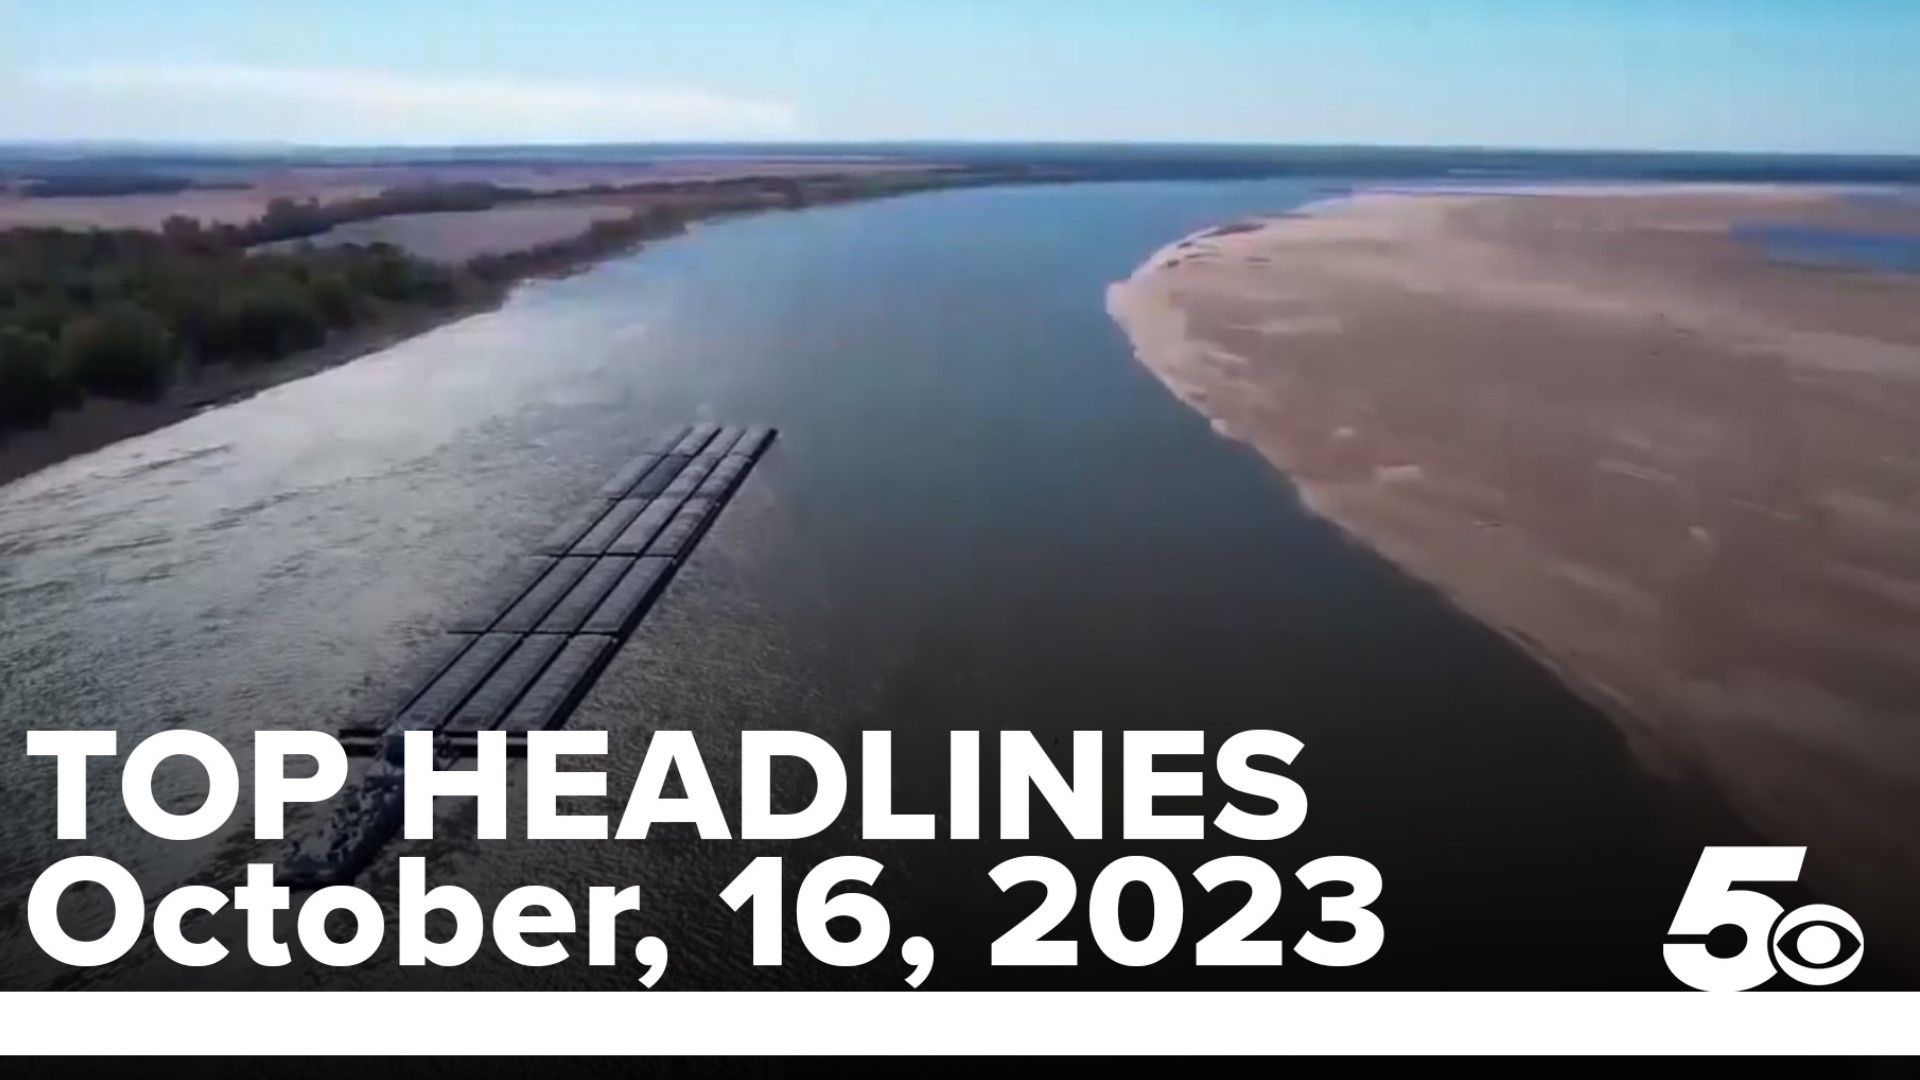 Watch 5NEWS Top Headlines to learn why the barges in the Mississippi River are not moving and how this could impact Arkansas.